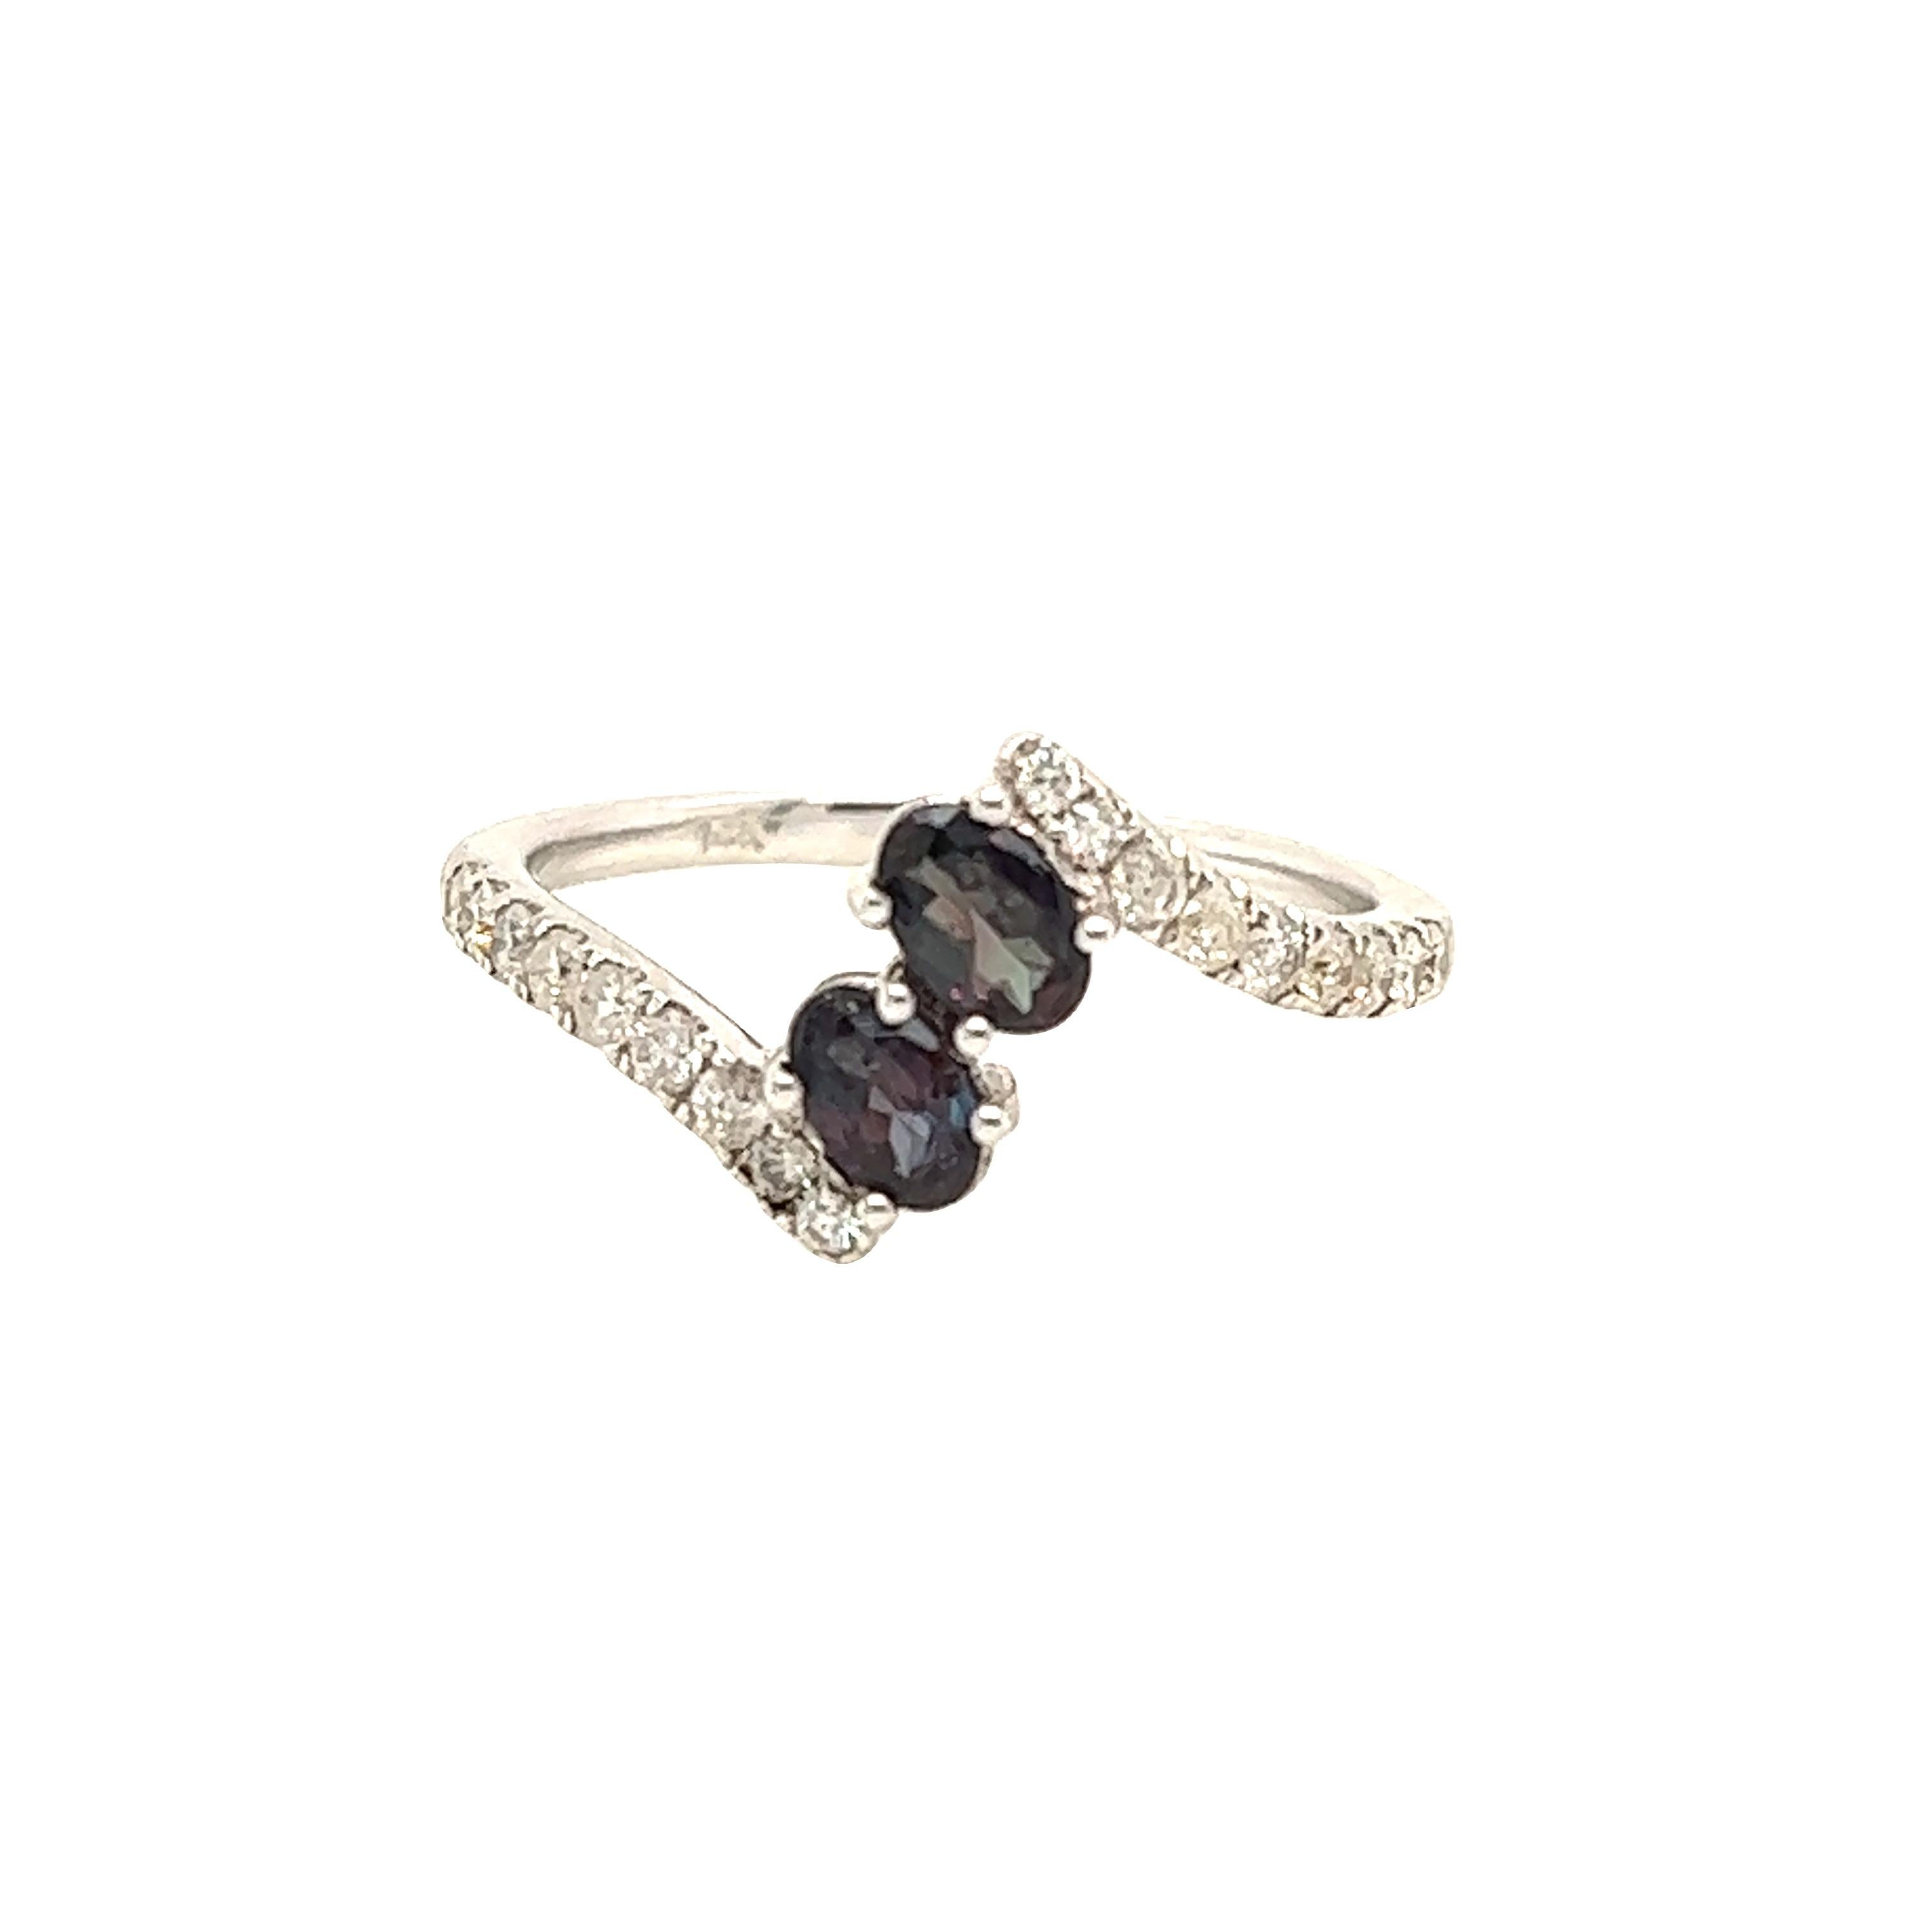 This is a gorgeous natural AAA quality oval Alexandrite surrounded by dainty diamonds that is set in a vintage white gold setting. This ring features a natural 0.48 carat oval alexandrite that is surrounded by brilliant white diamonds. The ring is a